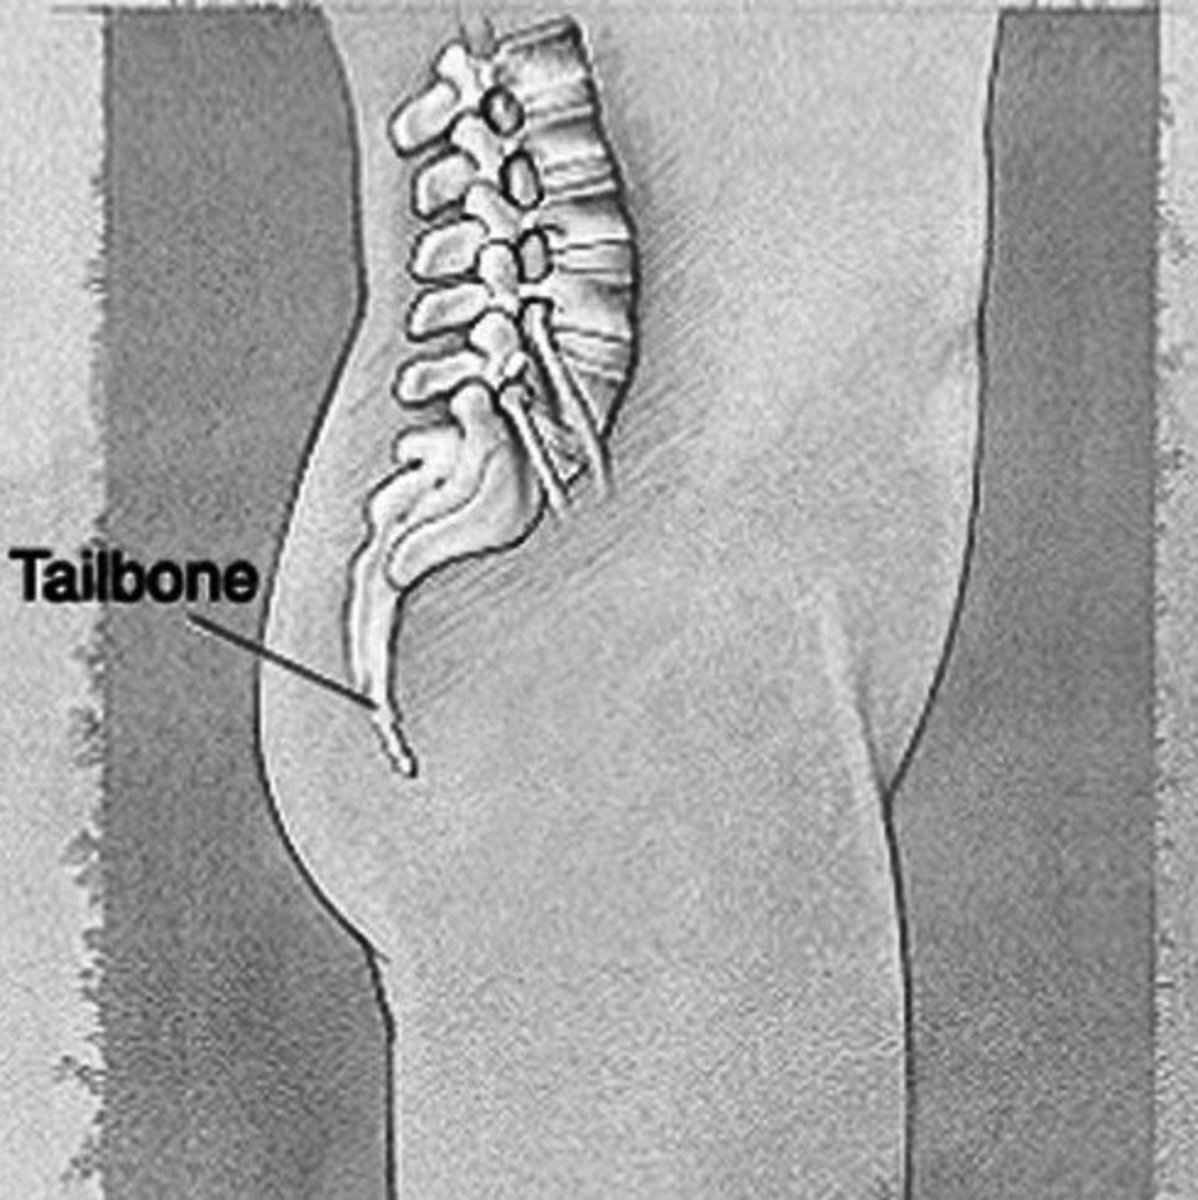 Bruised tailbone - Symptoms, Causes, Treatment, Healing time | HubPages